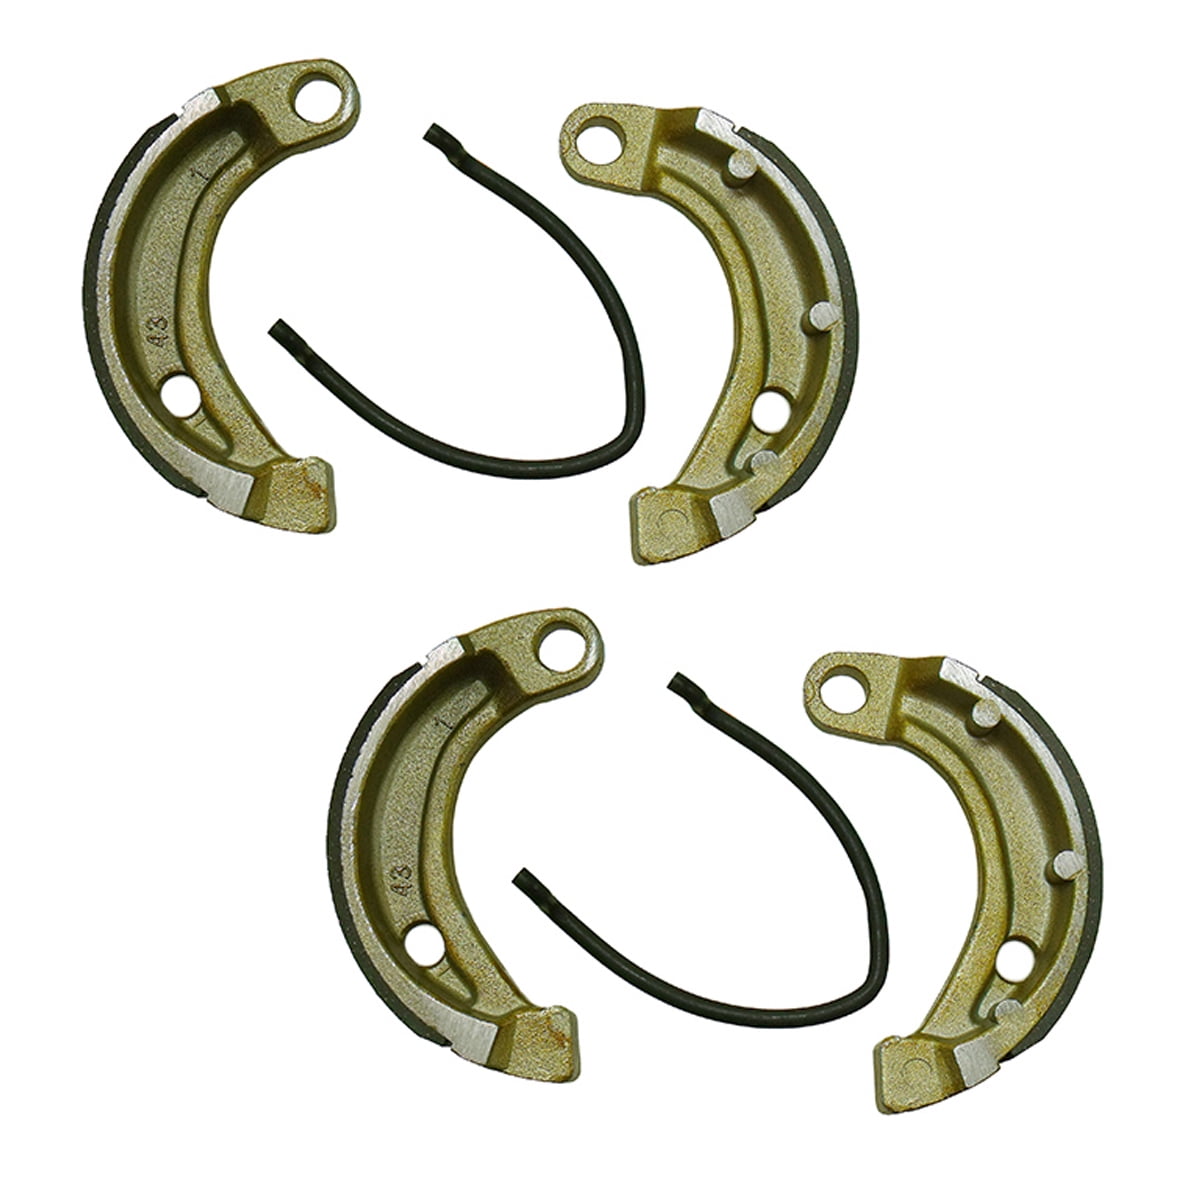 Caltric Front Brake Shoes Compatible with Polaris Outlaw 50 90 2007-2016 